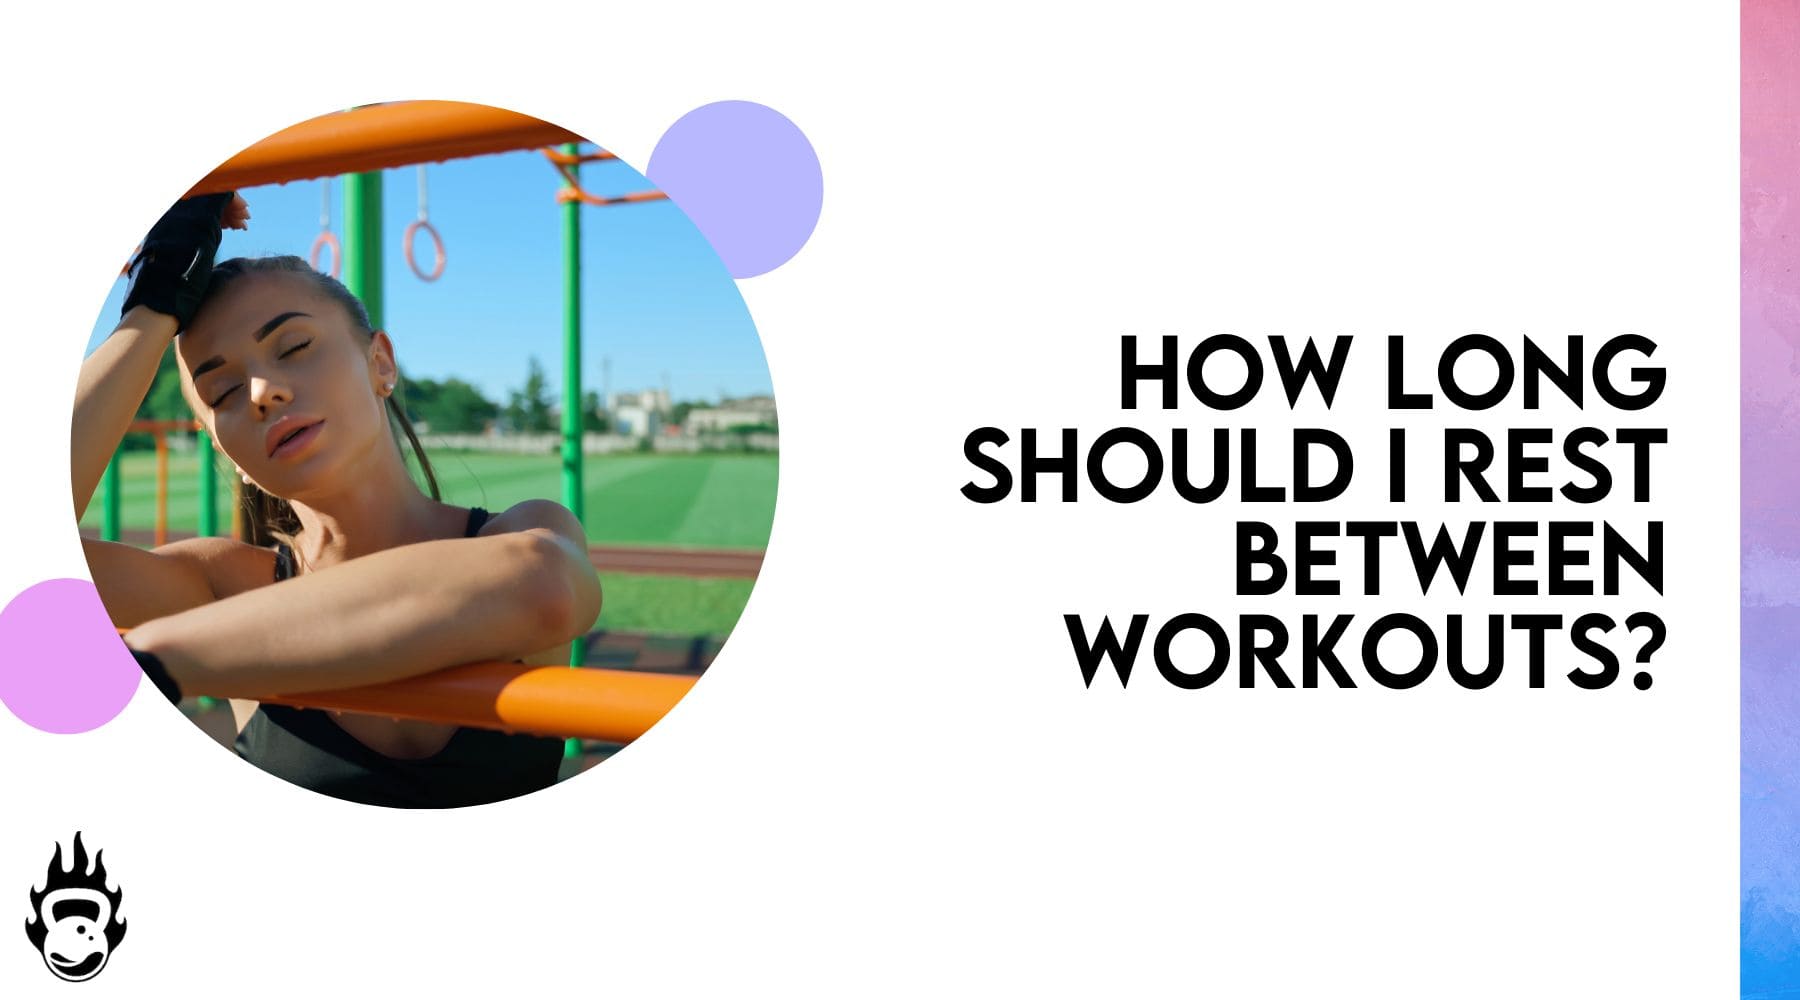 How much should I rest between practices?